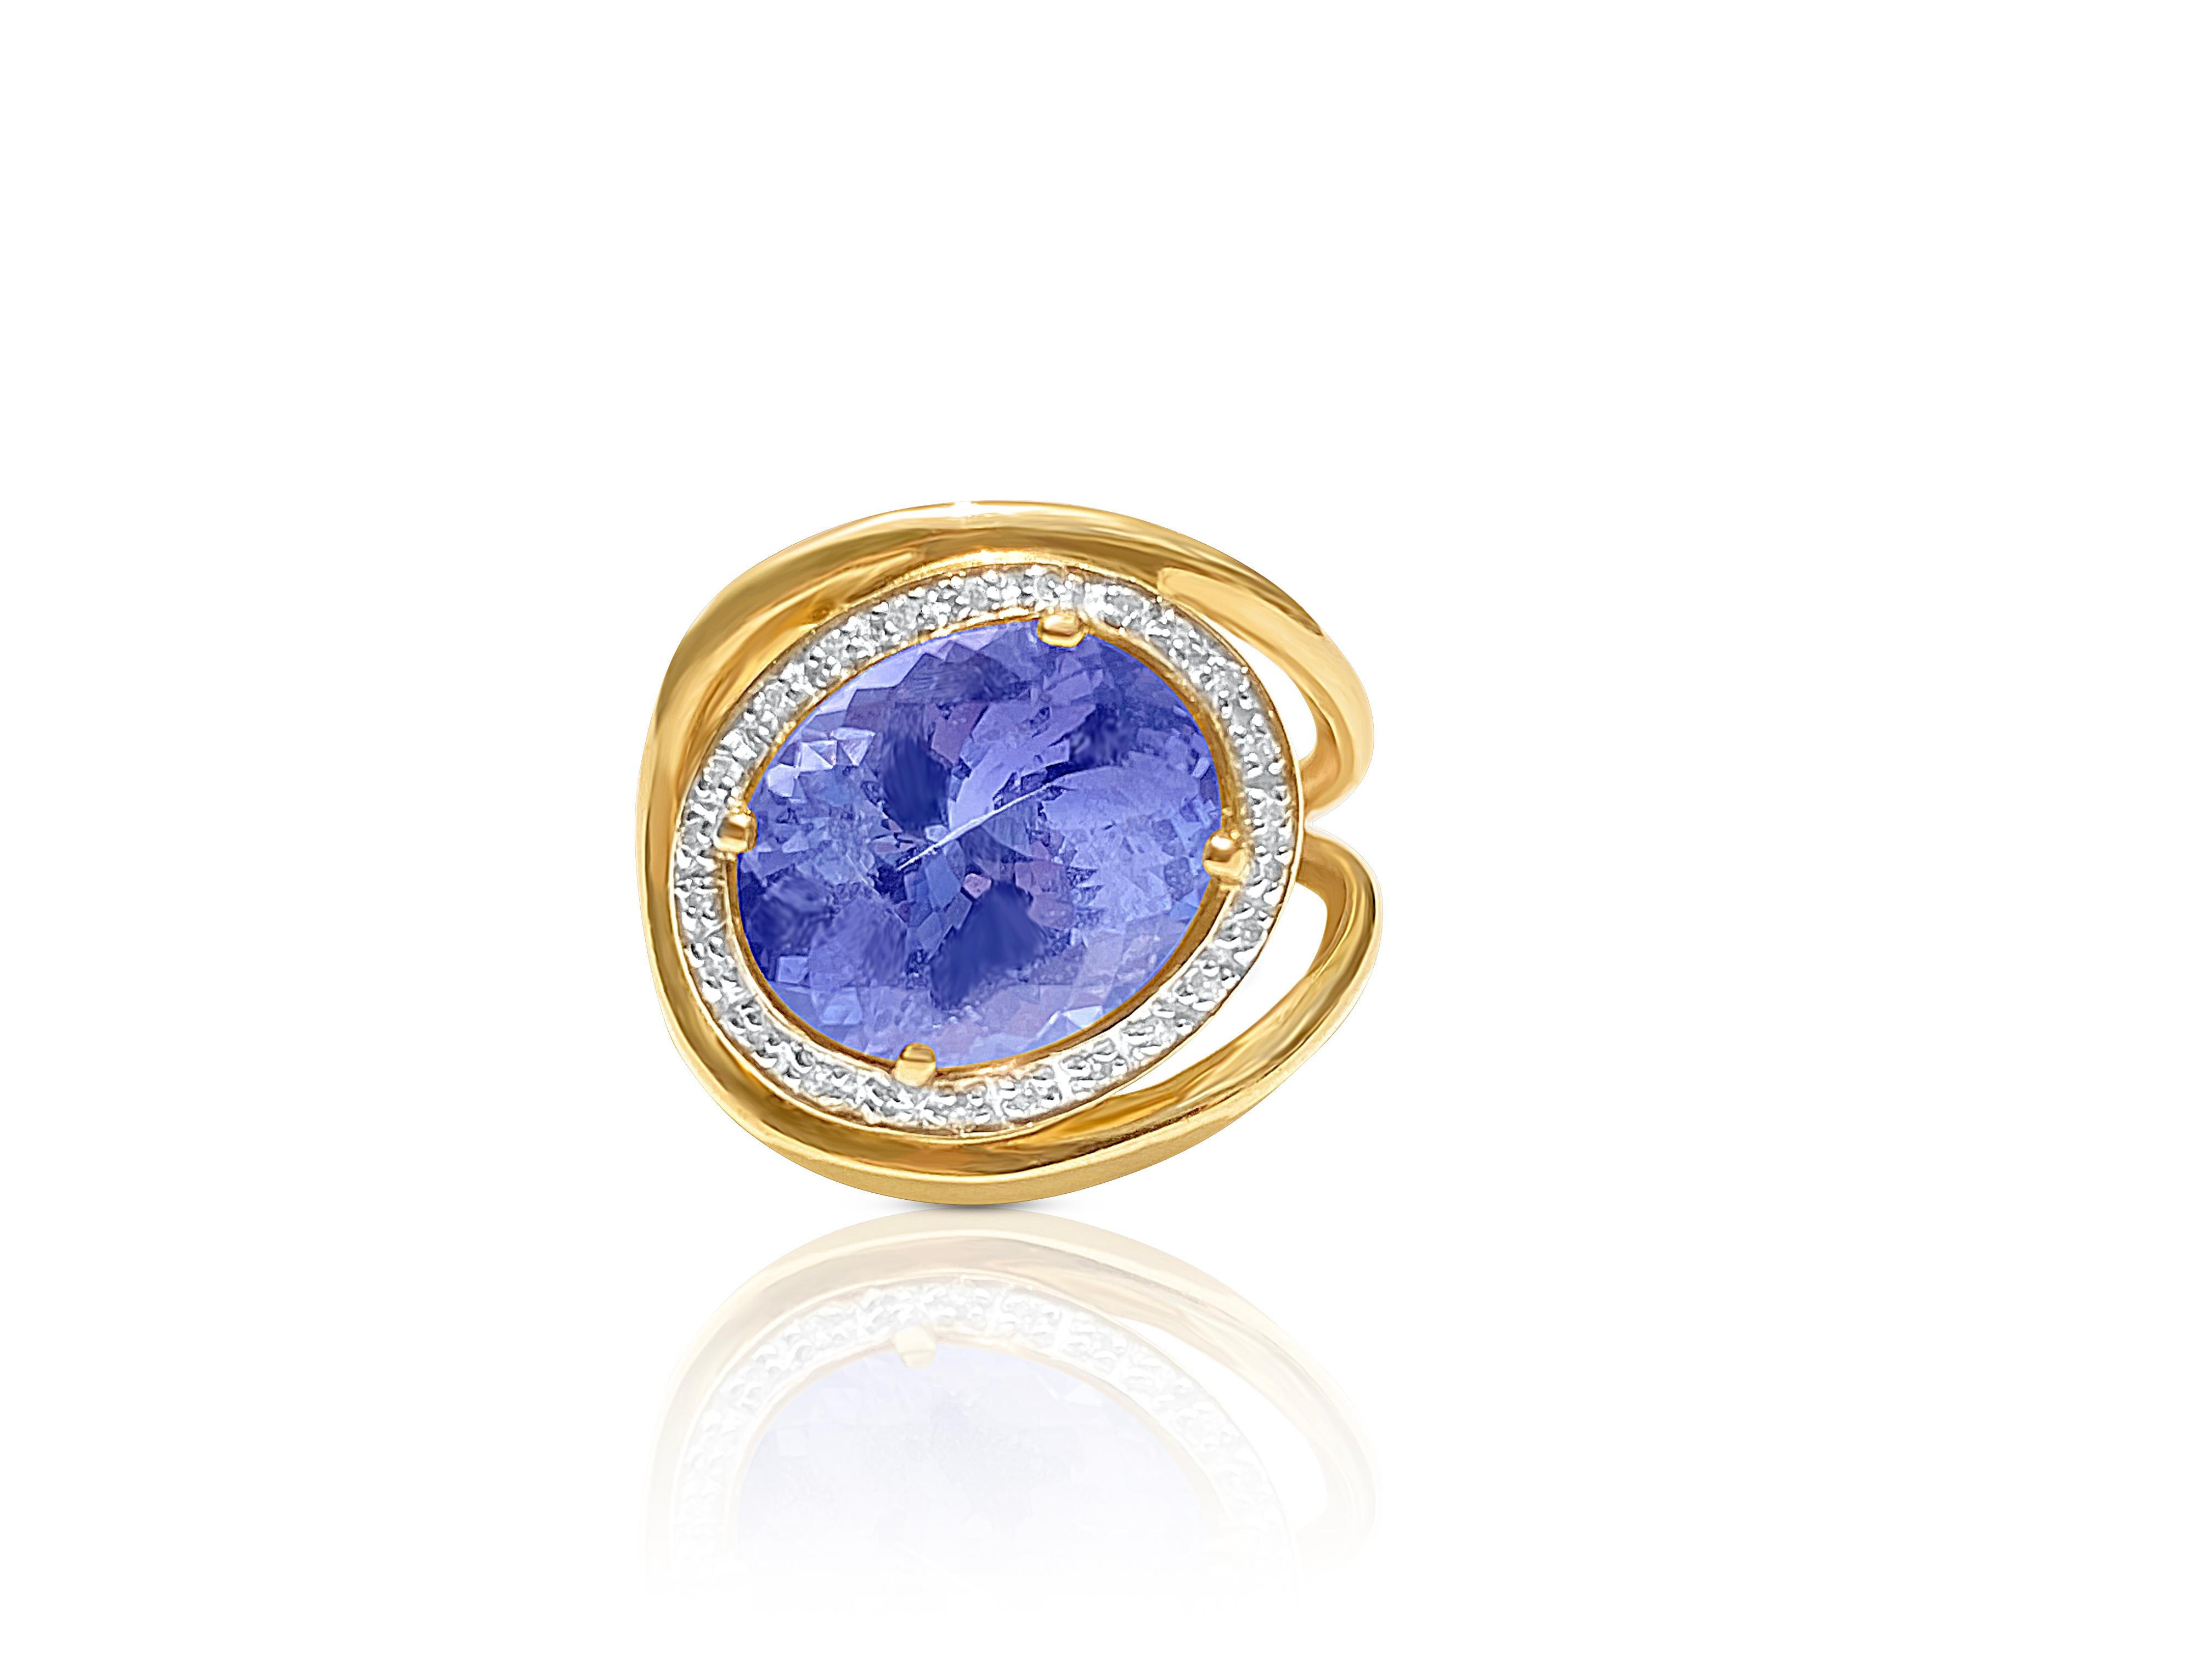 Stunning 4 carat oval Tanzanite mounted in 14k gold split shank ring setting. Ring setting cleverly wraps around the finger for a unique and comfortable wear. Center stone is 4 prong set and adorned with 0.20 carats in round cut diamonds.

✔ Gold